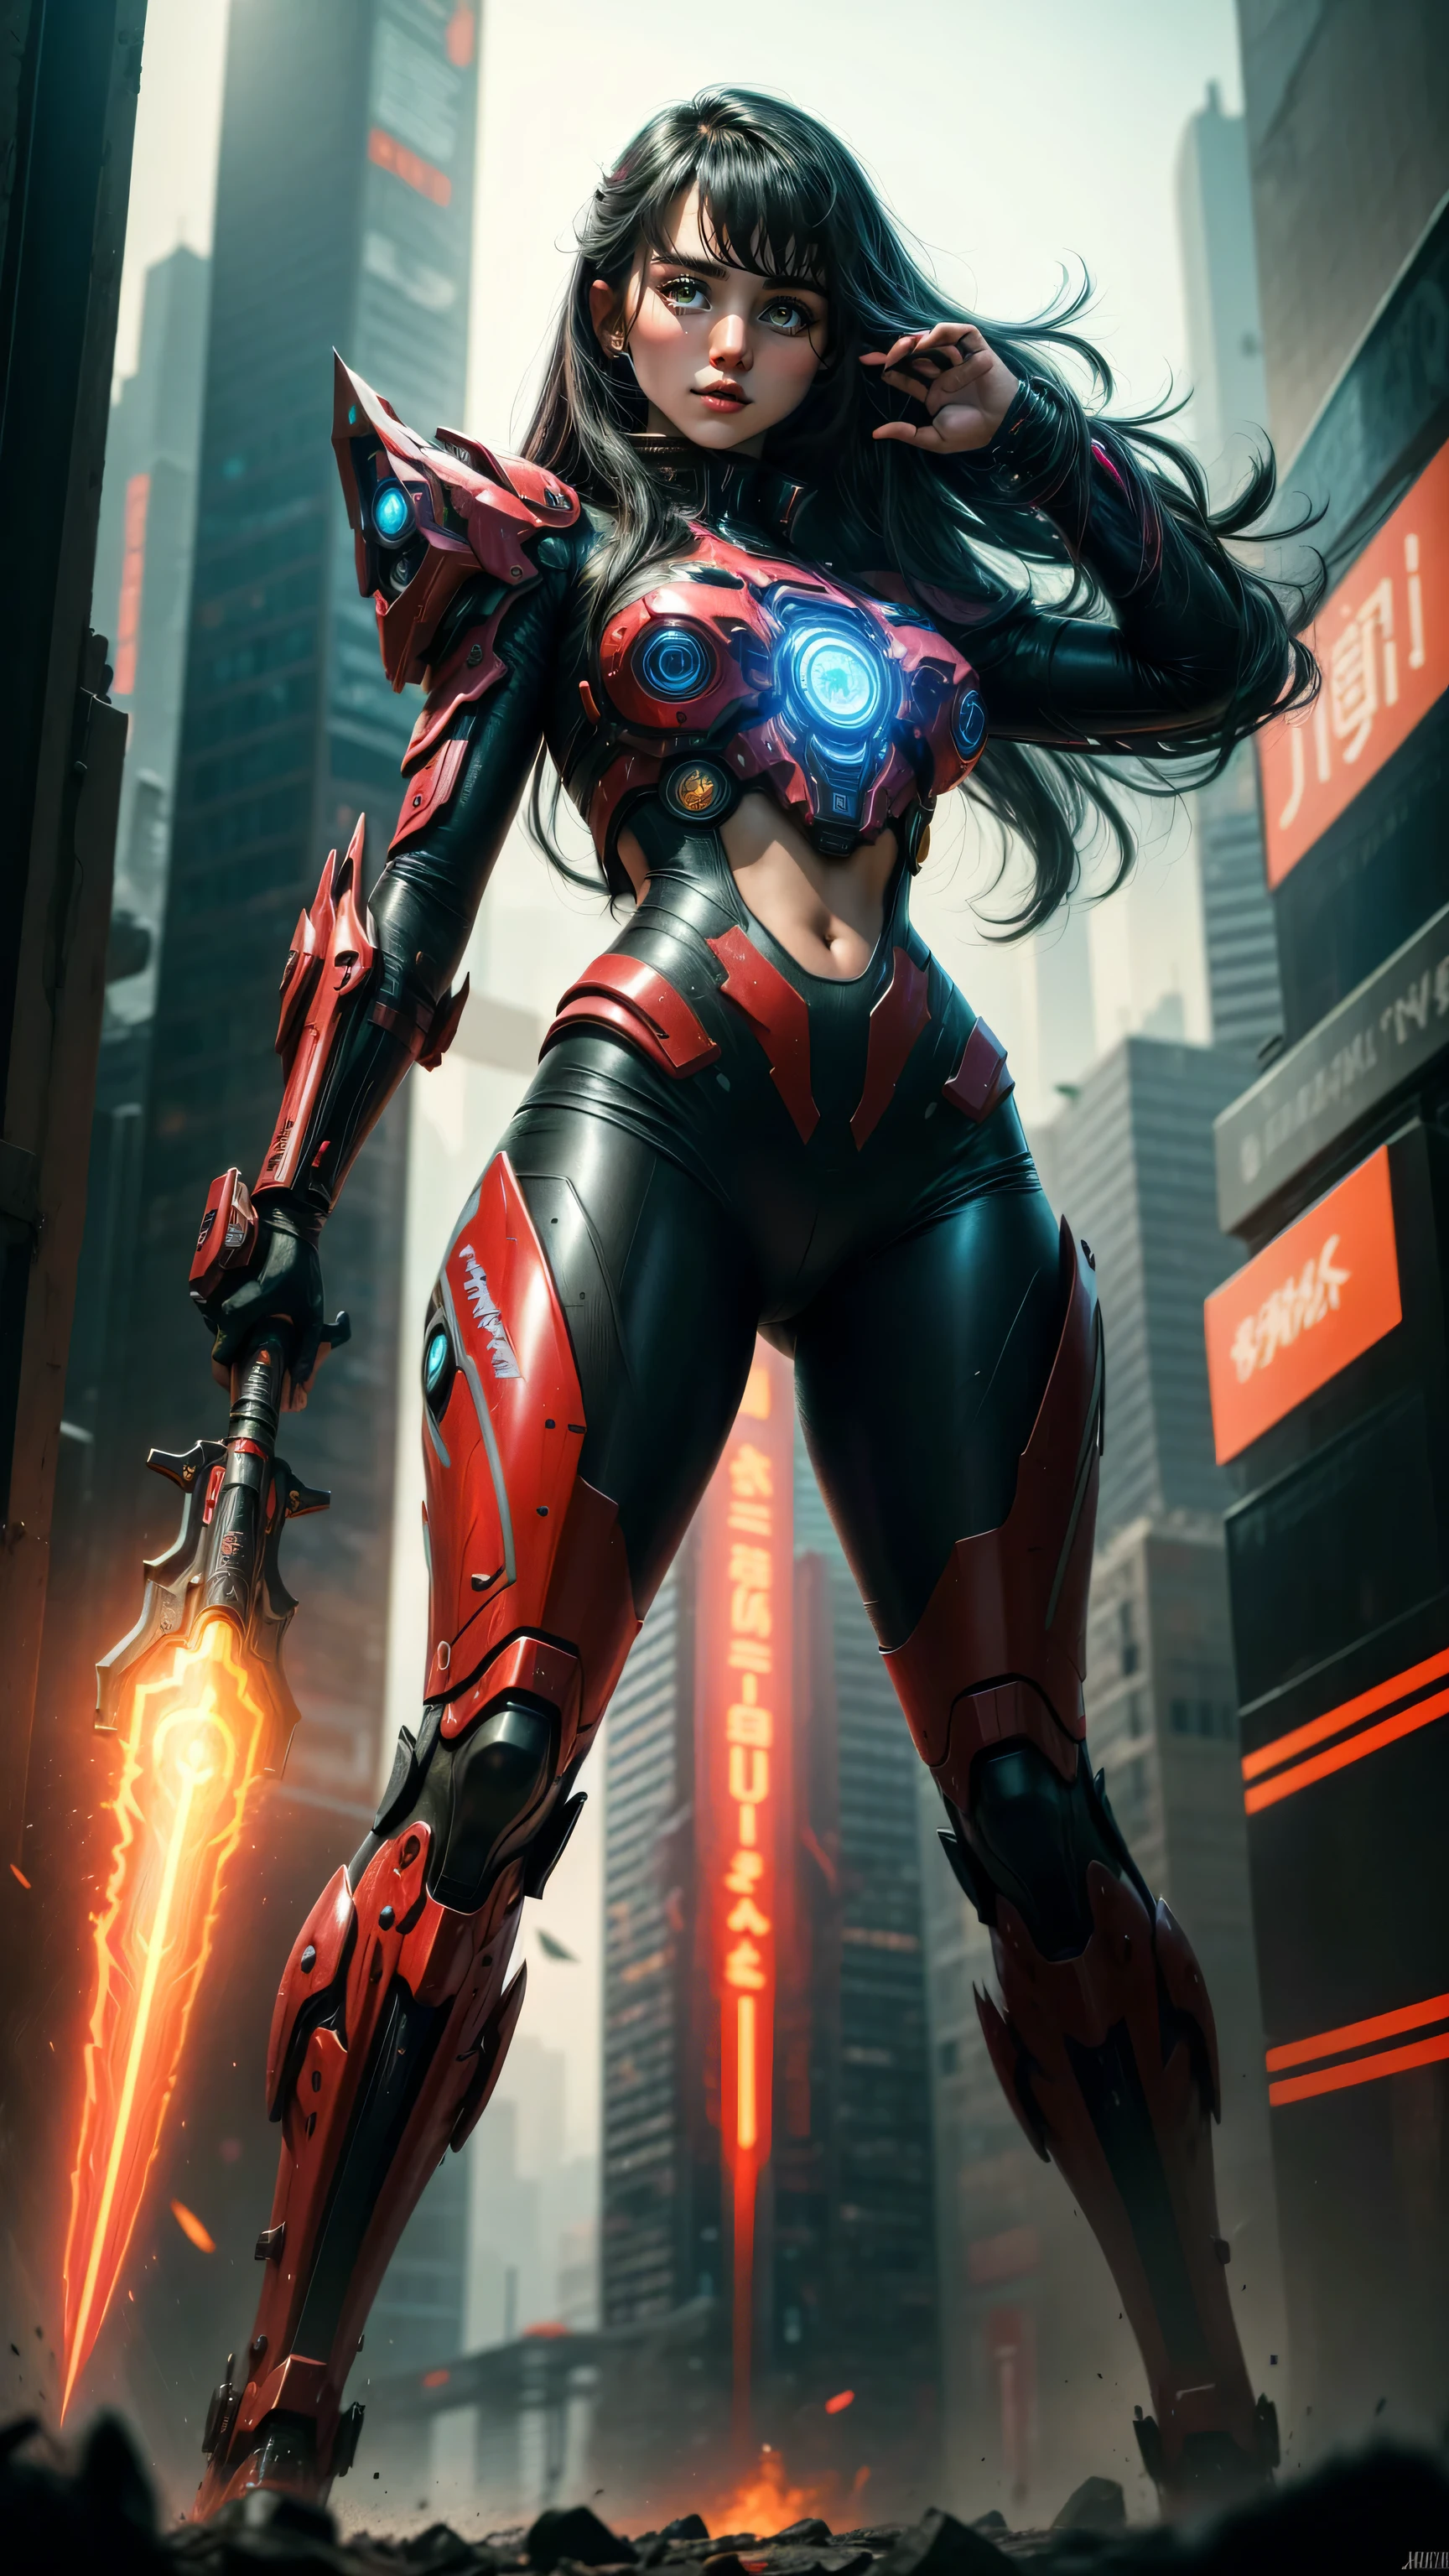 In the pulsating core of the cyberpunk metropolis, Jakarta, a strikingly ethereal Asian woman with a voluminous waterfall of ebony hair grabs attention in the vibrant, neon-lit crowd. Clad in a formidable, fiery-red mecha suit, she emanates tenacity and grit. The polished suit's surfaces mirror the technicolor cityscape, enhancing the enthralling lights and holograms that dart through the air. With her ornate, ceremonial blade gripped tightly in hand, this captivating mystery embodies perseverance and optimism amidst Jakarta's riotous, fut